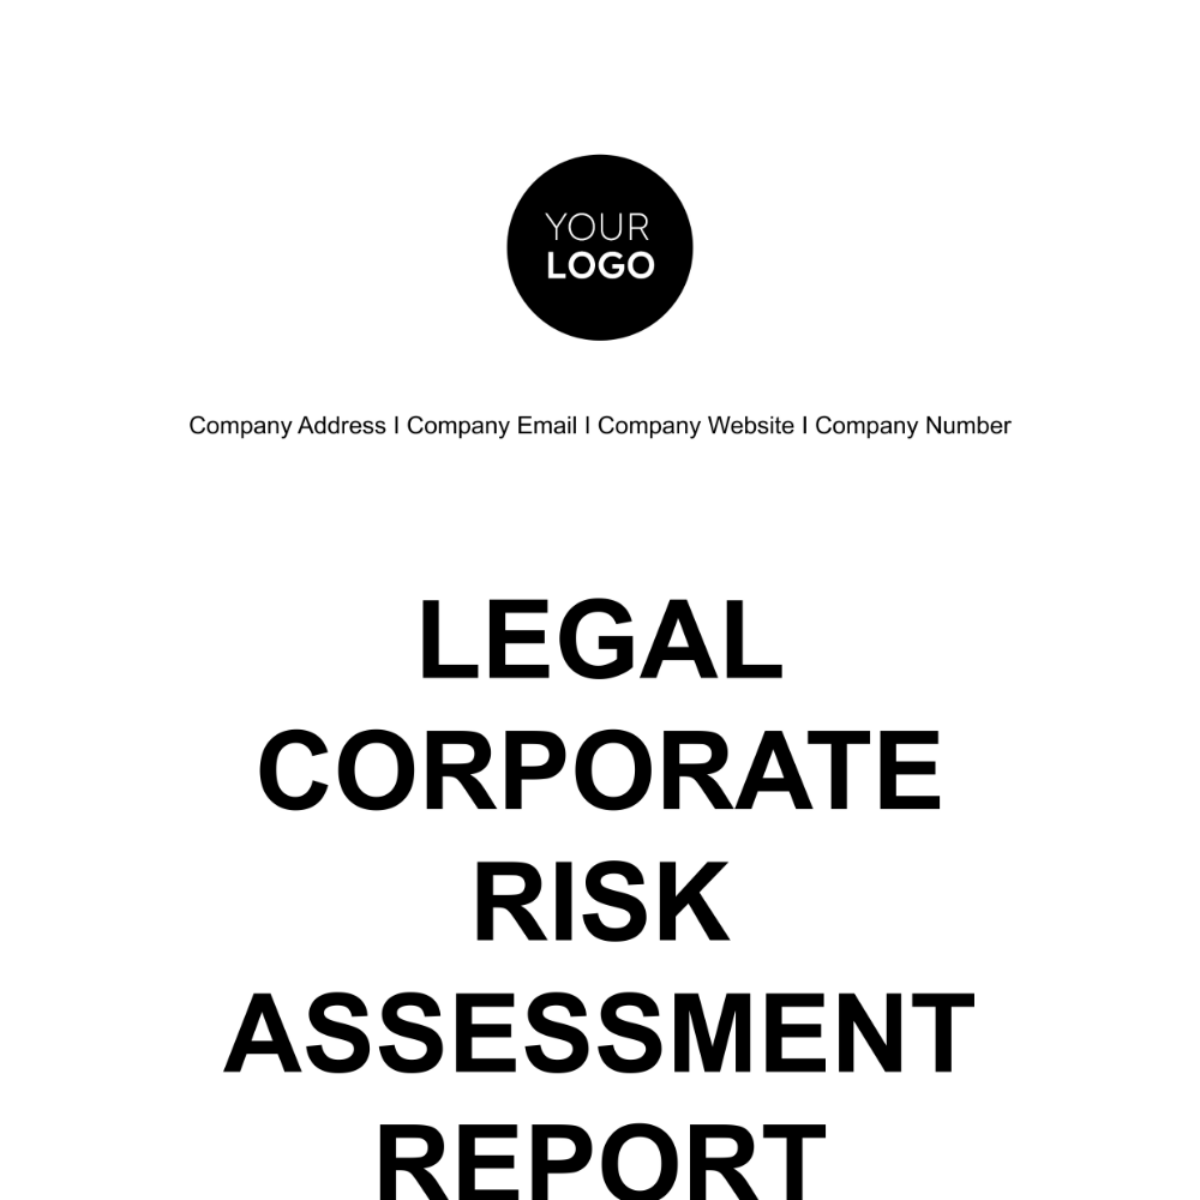 Free Legal Corporate Risk Assessment Report Template